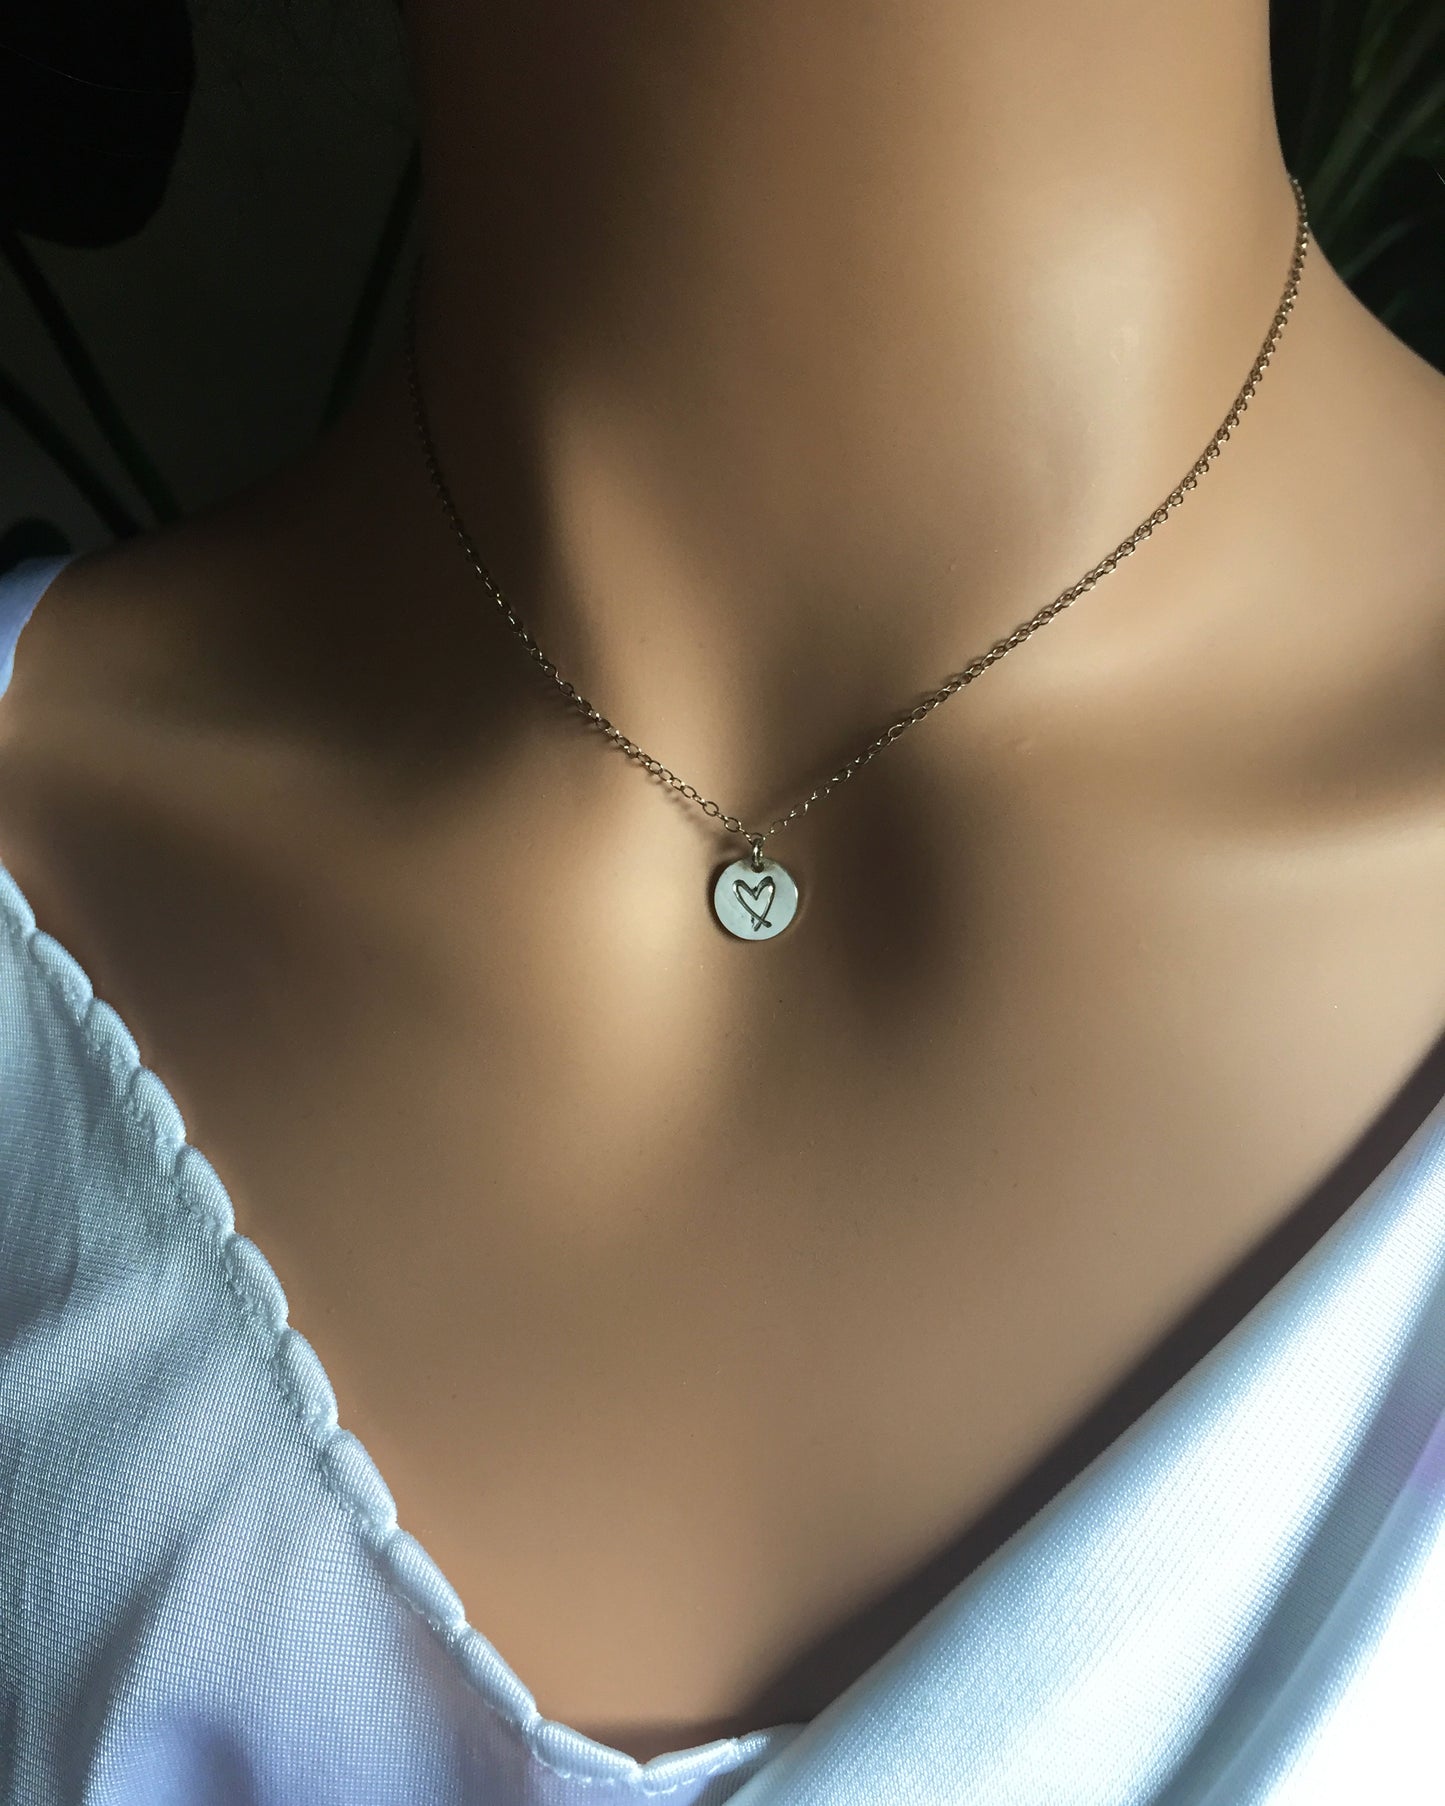 Dainty Heart Necklace For Mom | Sentimental Mom Gift For Birthday Mother's Day | IB Jewelry